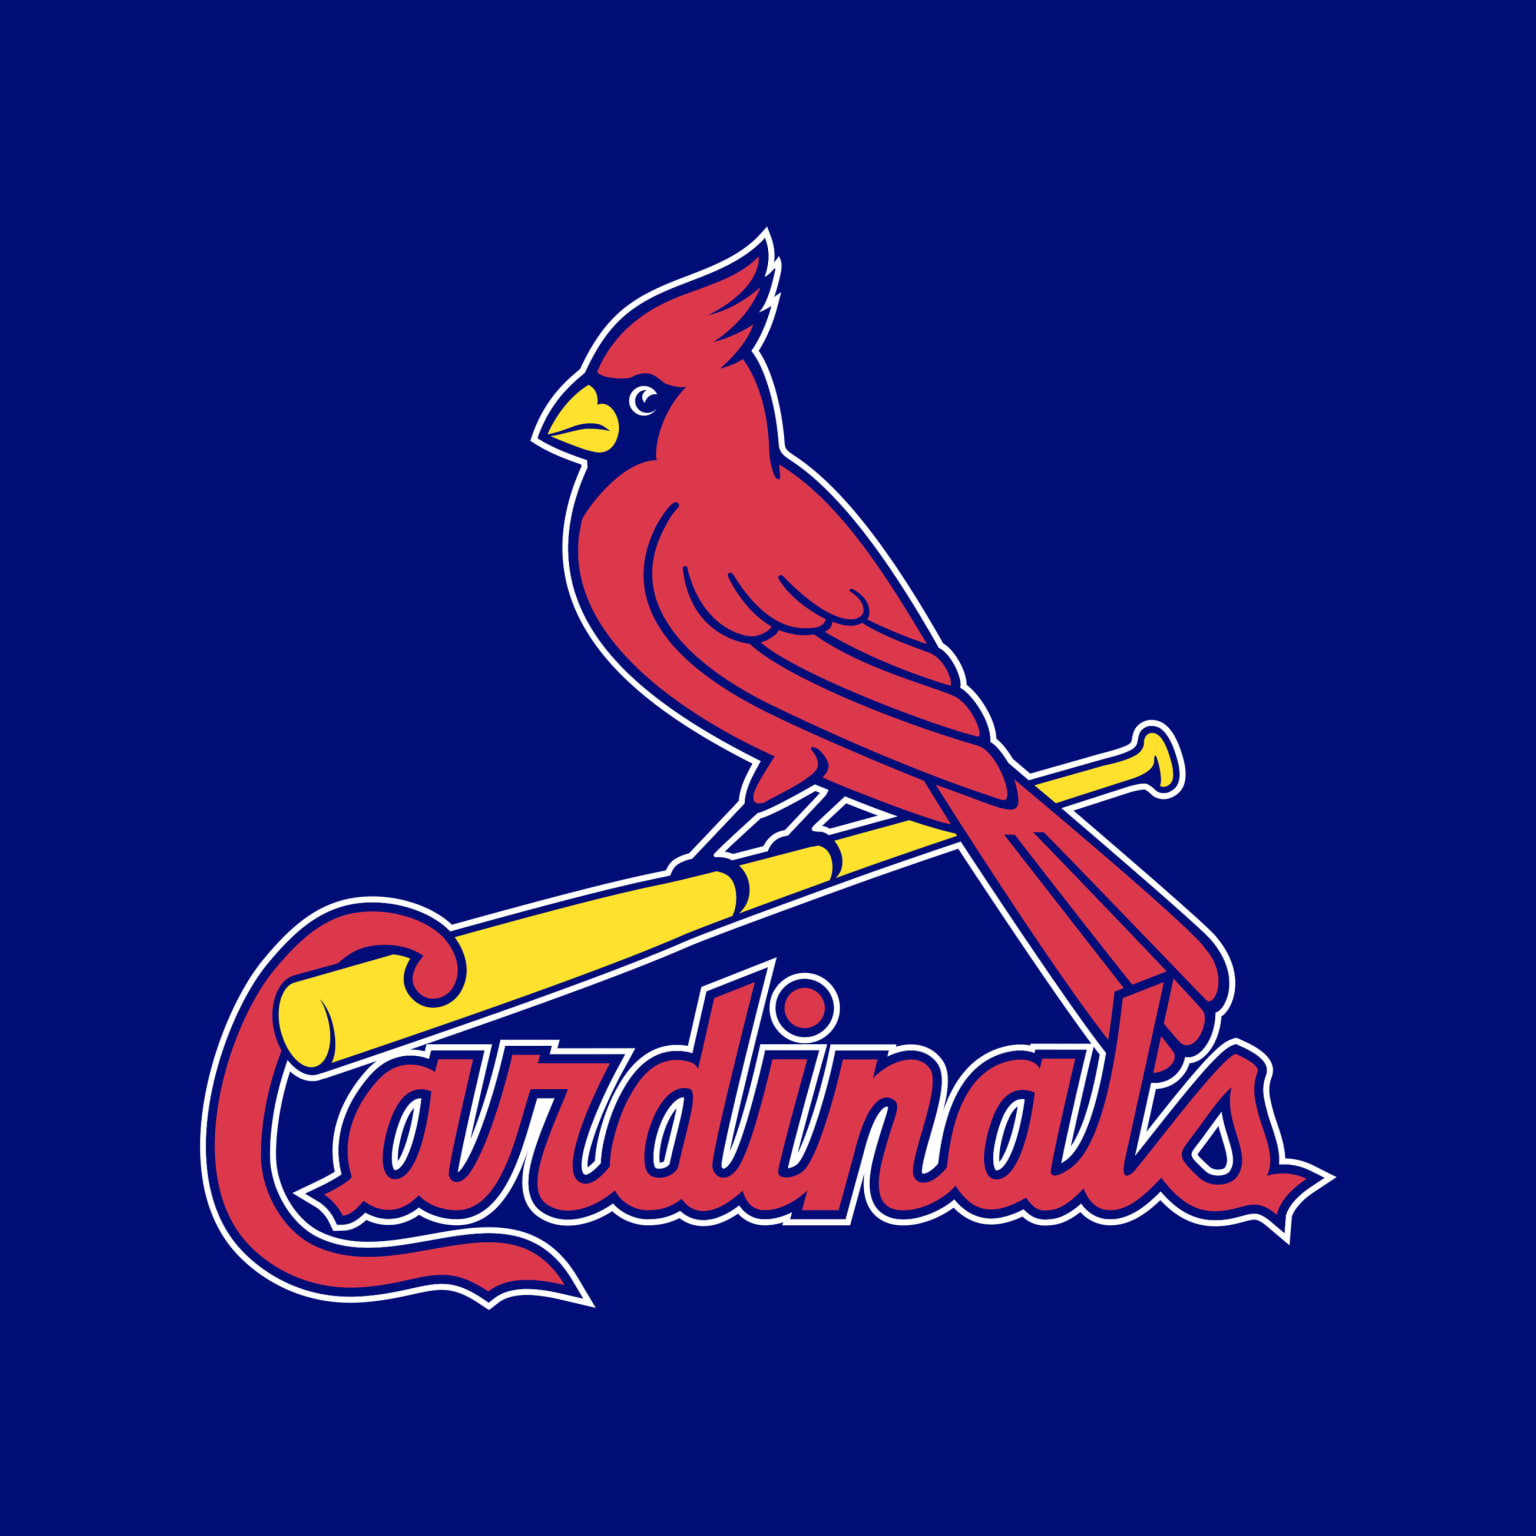 St. Louis Cardinals - Calling all First Responders and medical